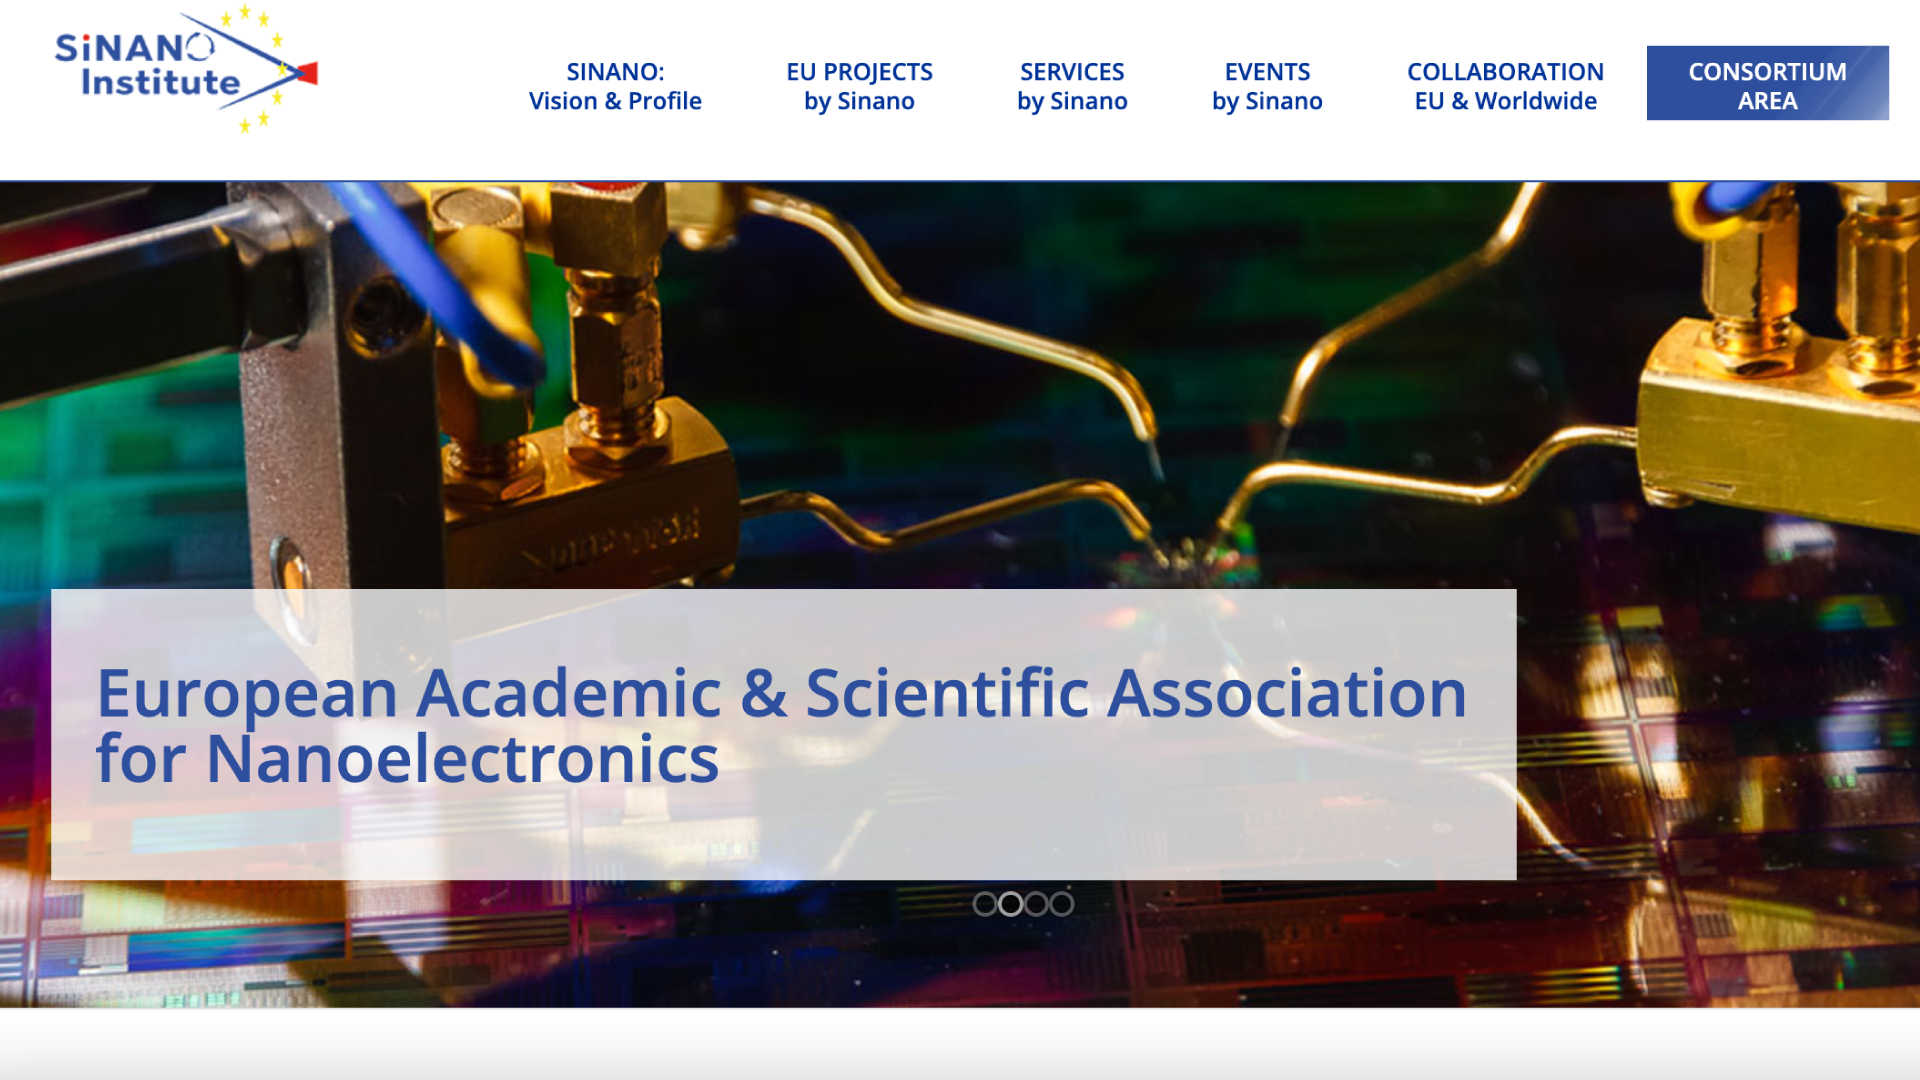 INL joins SiNANO, the European Academic and Scientific Association for Nanoelectronics